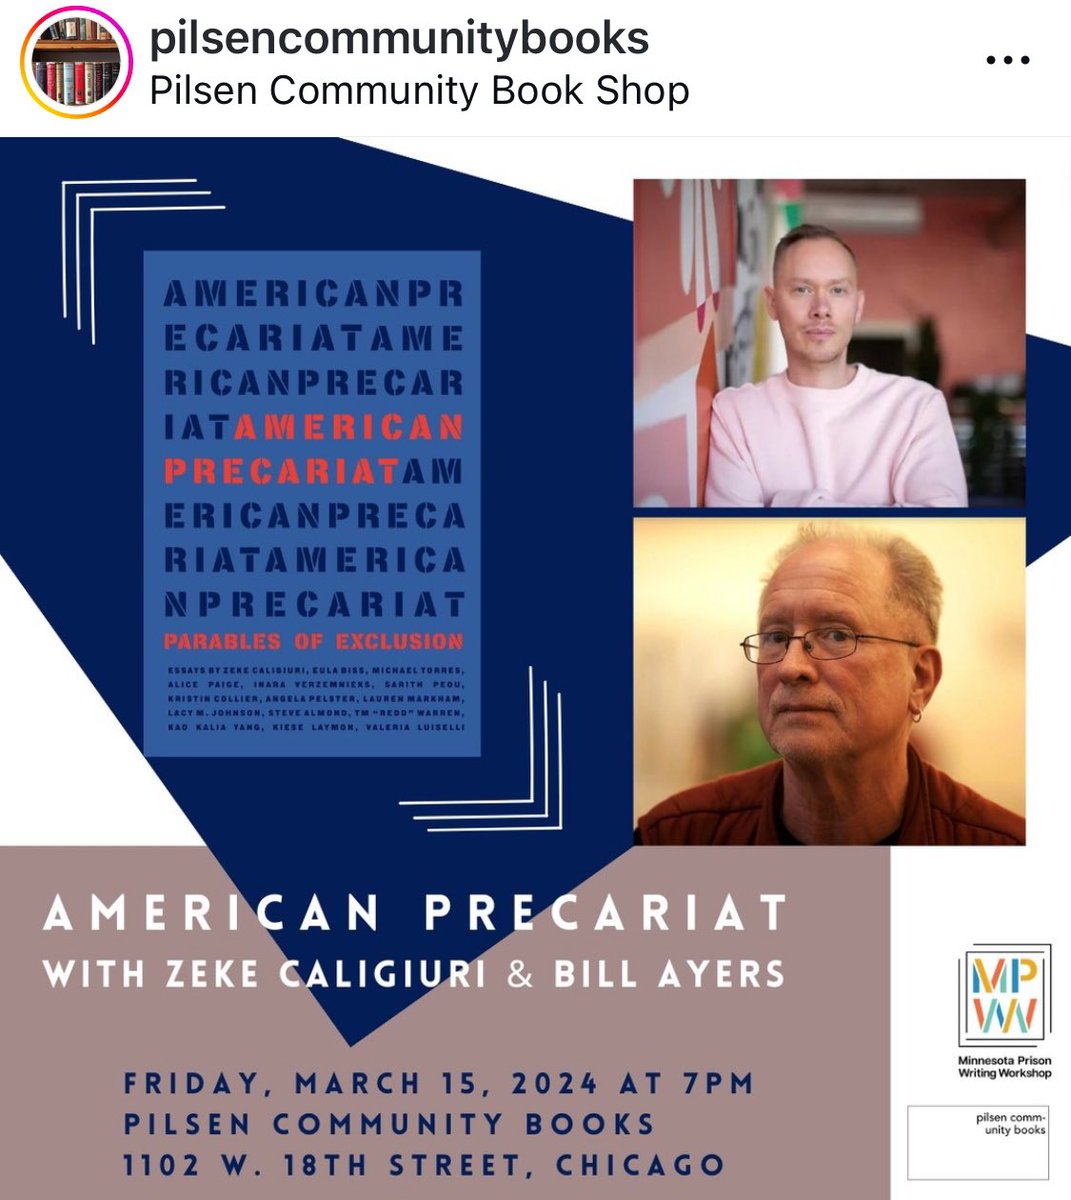 📣 Chicago Friends! ✨TONIGHT✨ Friday, March 15th at 7PM, please join Zeke Caligiuri in conversation with the inimitable @WilliamAyers for his @UnderTheTreePod podcast at @PilsenCommBooks about precarity and the “revolutionary” anthology ✨AMERICAN PRECARIAT✨ @Coffee_House_ 📚